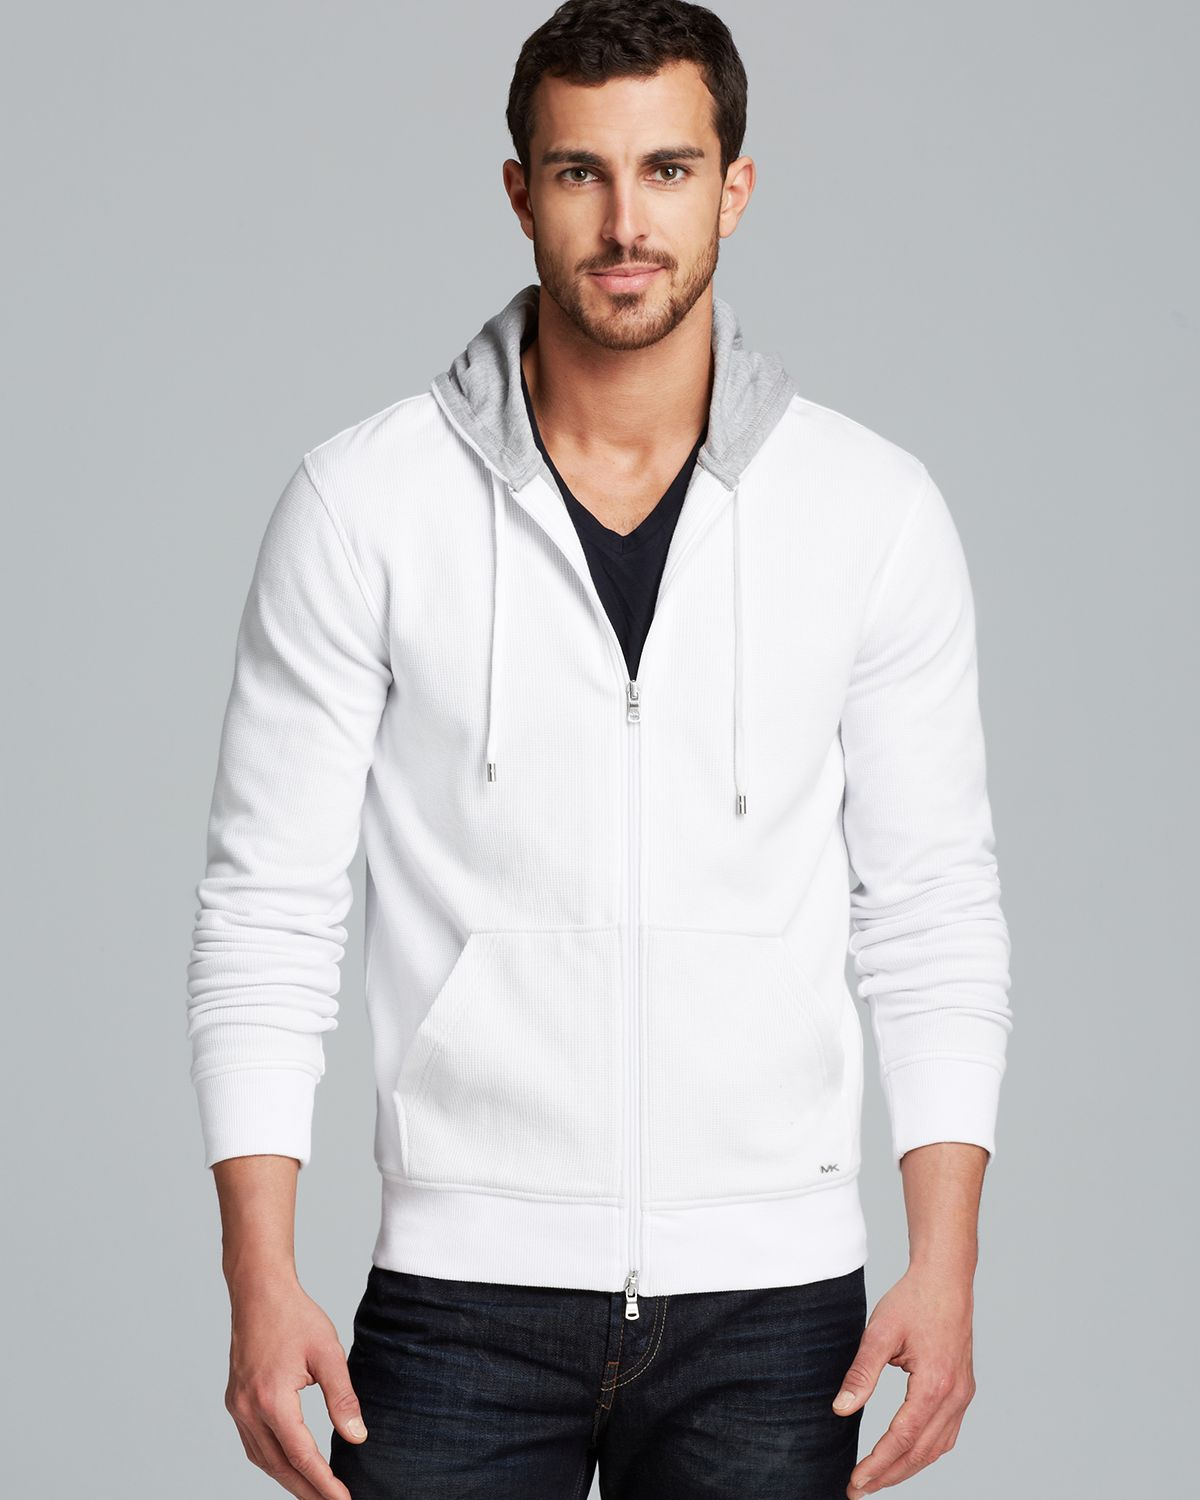 Michael Kors Waffle Hoodie in White for Men - Lyst